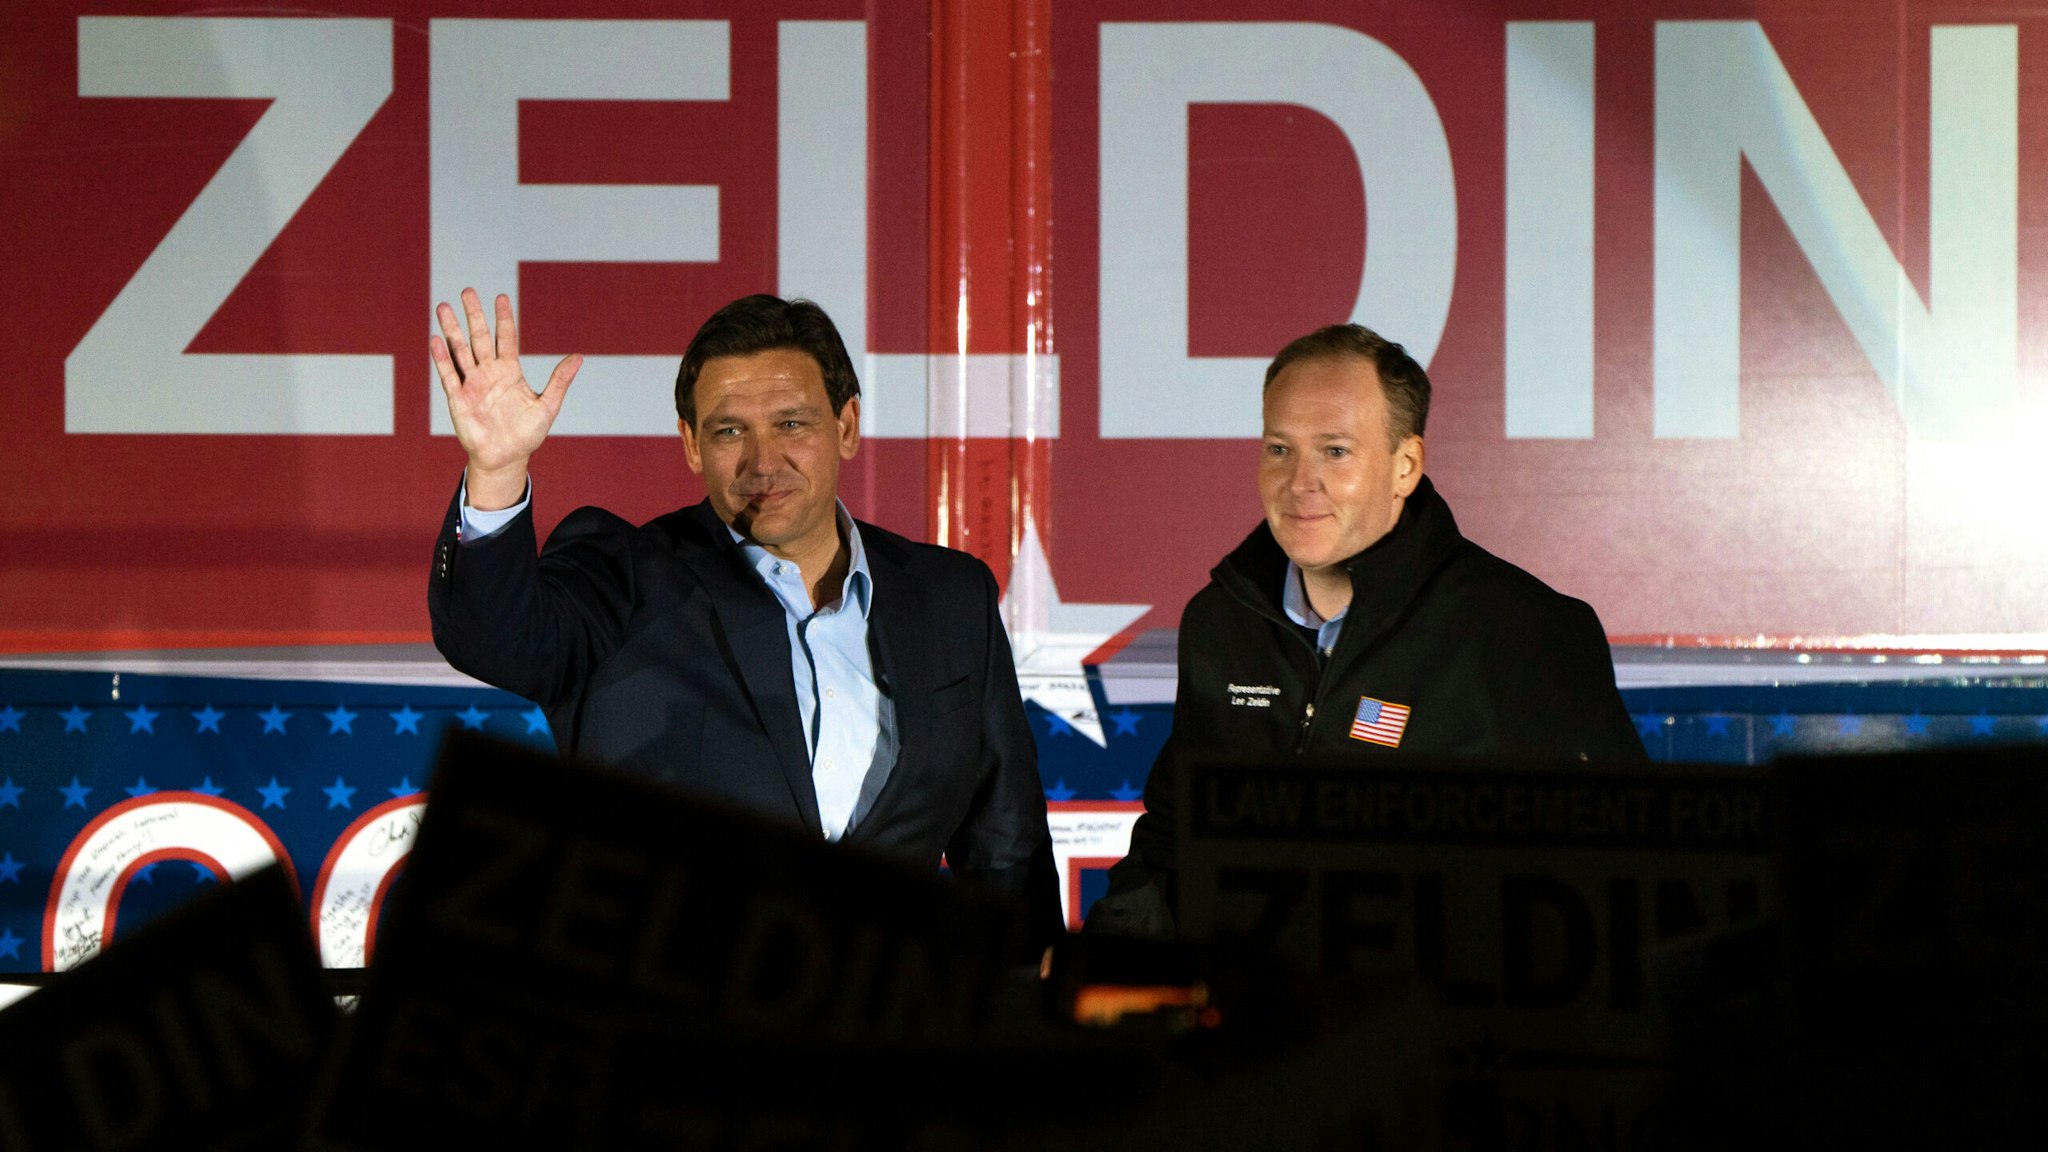 HAUPPAUGE, NY - OCTOBER 29: Florida Gov. Ron DeSantis (L) campaigns alongside New York Republican gubernatorial hopeful, Rep. Lee Zeldin (R) at a Get Out The Vote Rally on October 29, 2022 in Hauppauge, New York. Zeldin has closed the gap in recent polls to four points after the head to head debate against New York Governor Kathy Hochul. DeSantis, who's running for reelection himself, makes his latest political appearance outside his home state amid increasing rumors of a 2024 presidential run.